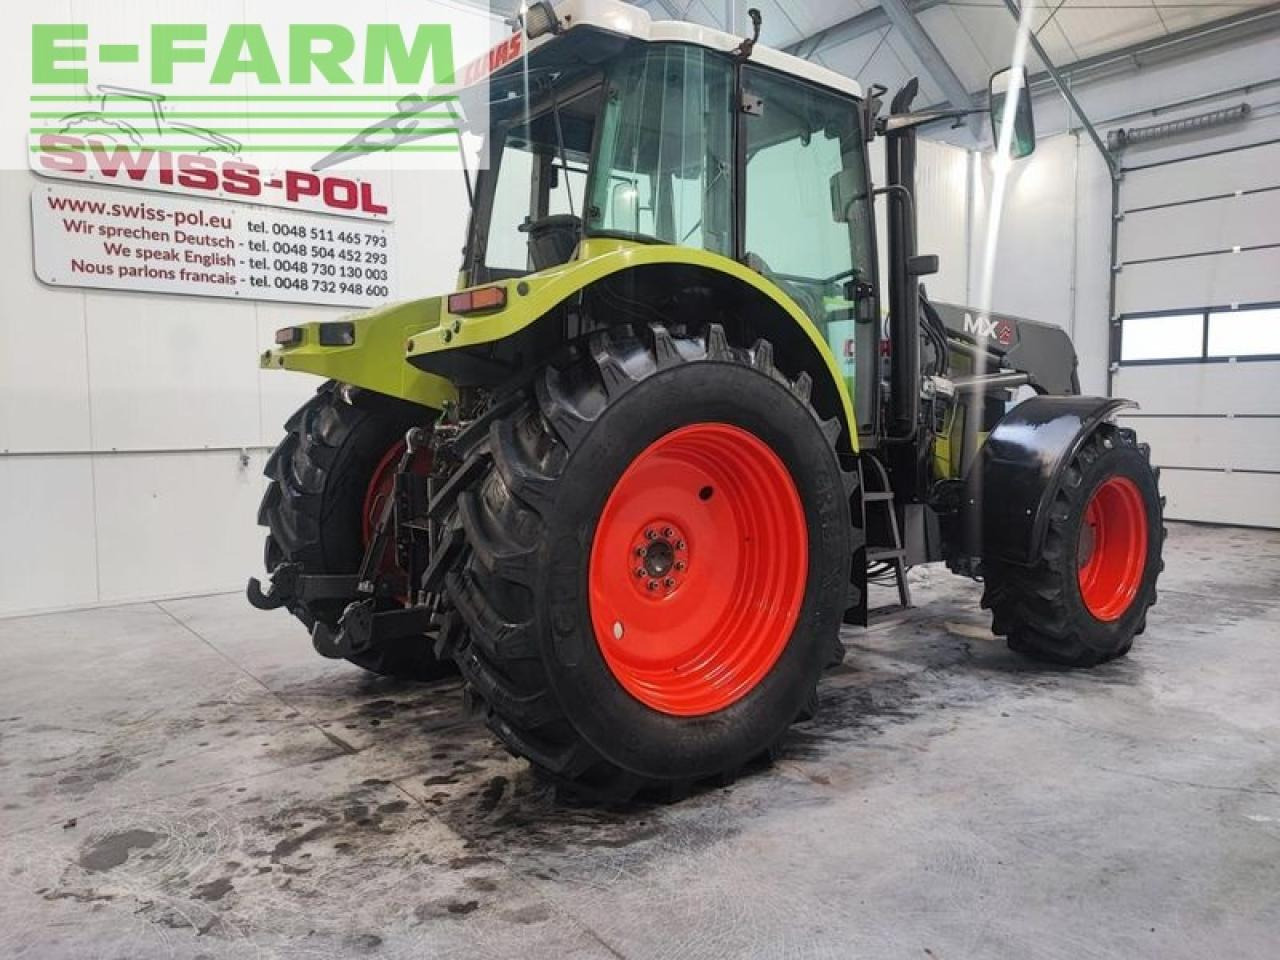 Tracteur agricole CLAAS ares 656rz